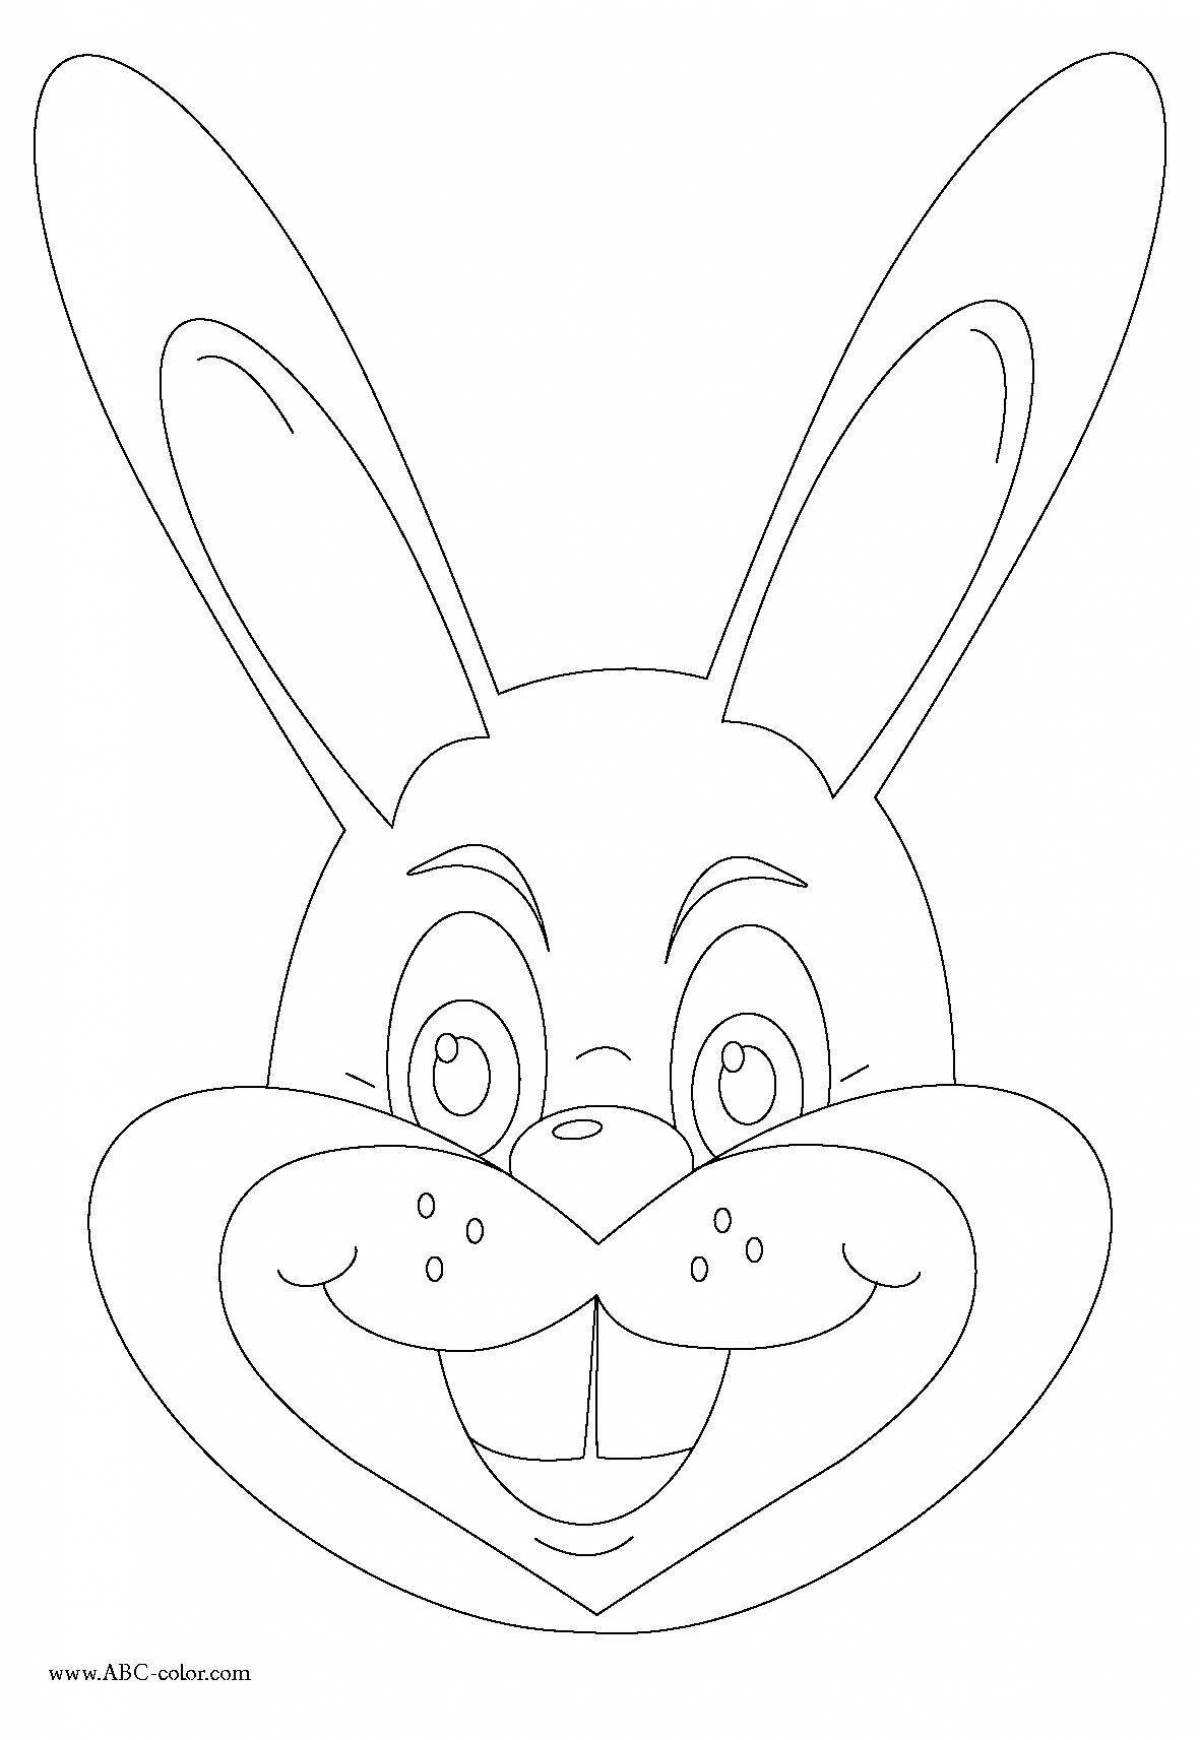 Colourful bunny mask coloring page